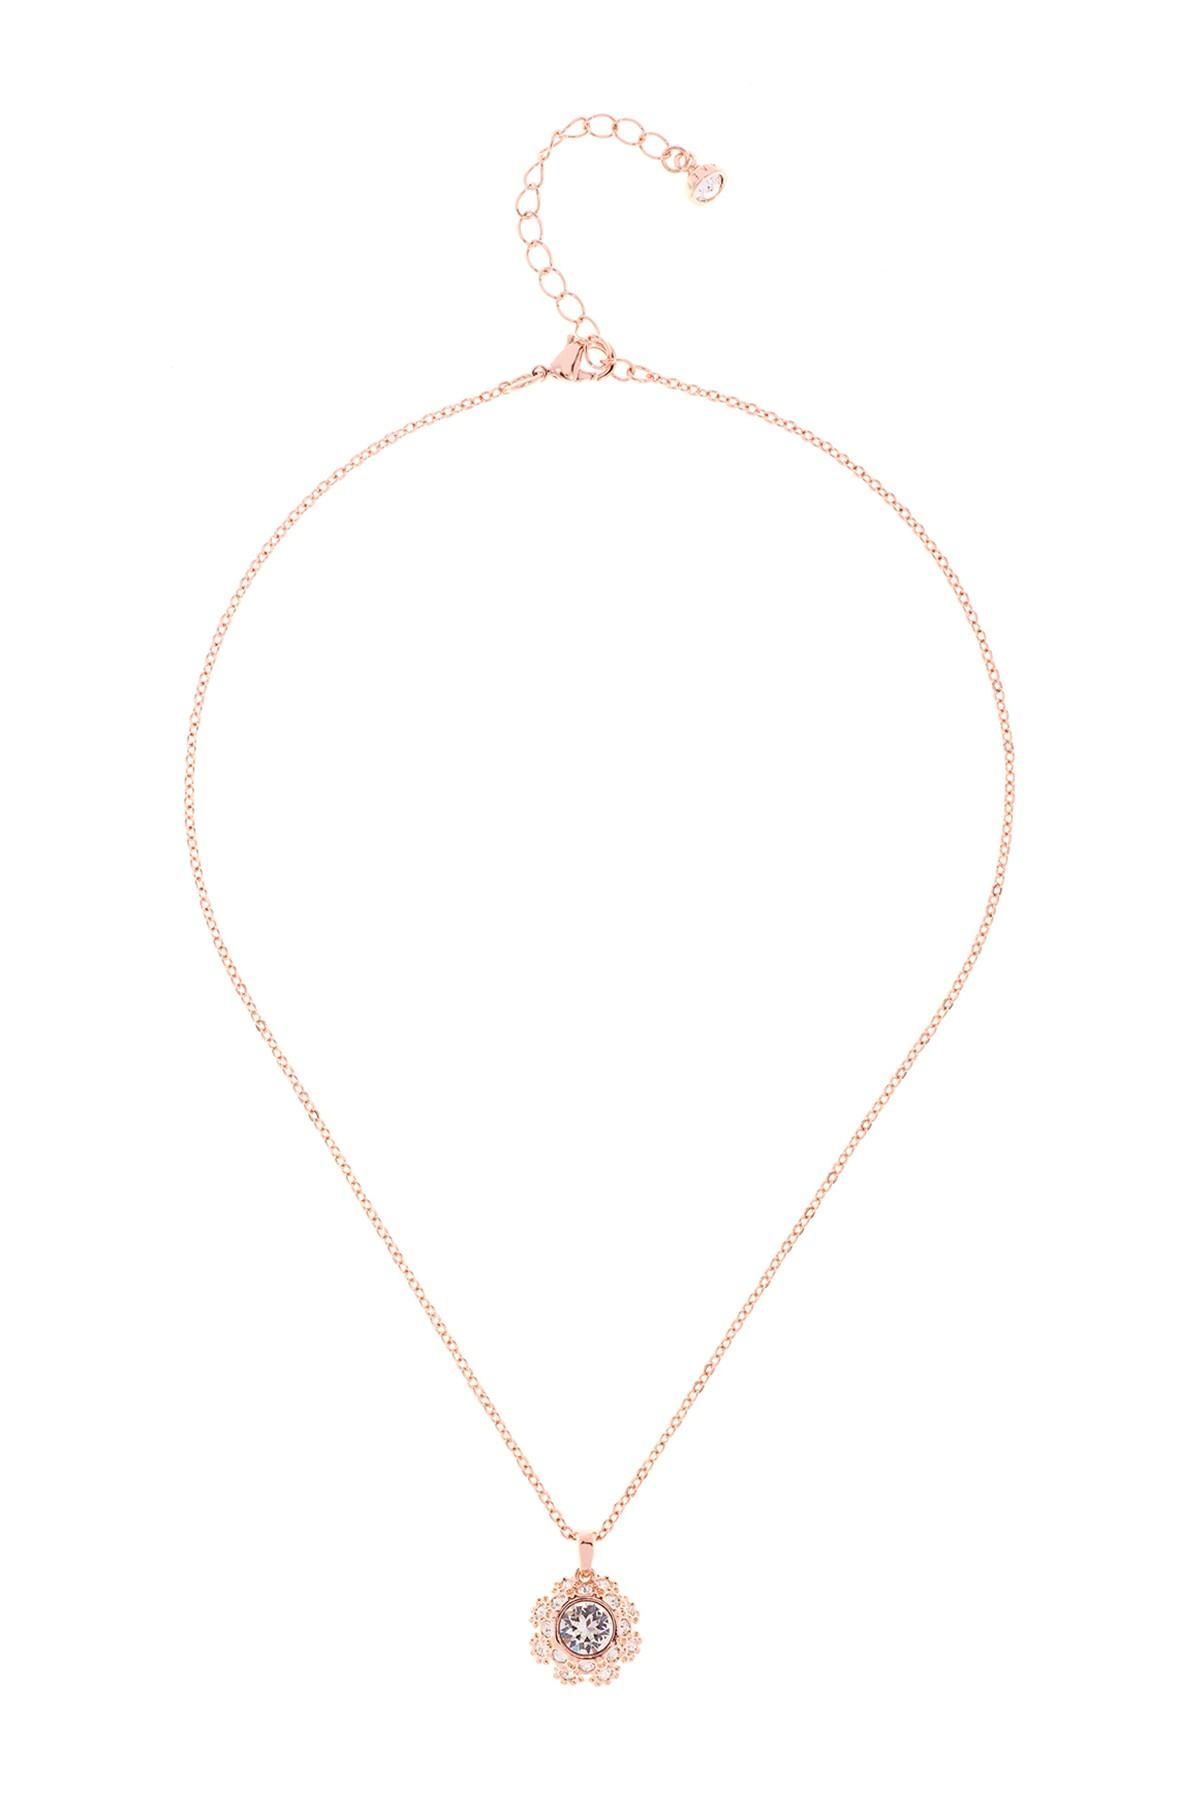 Lyst – Ted Baker Swarovski Crystal Embellished Sirou Crystal Daisy Intended For Most Recently Released Sparkling Daisy Flower Locket Element Necklaces (View 11 of 25)